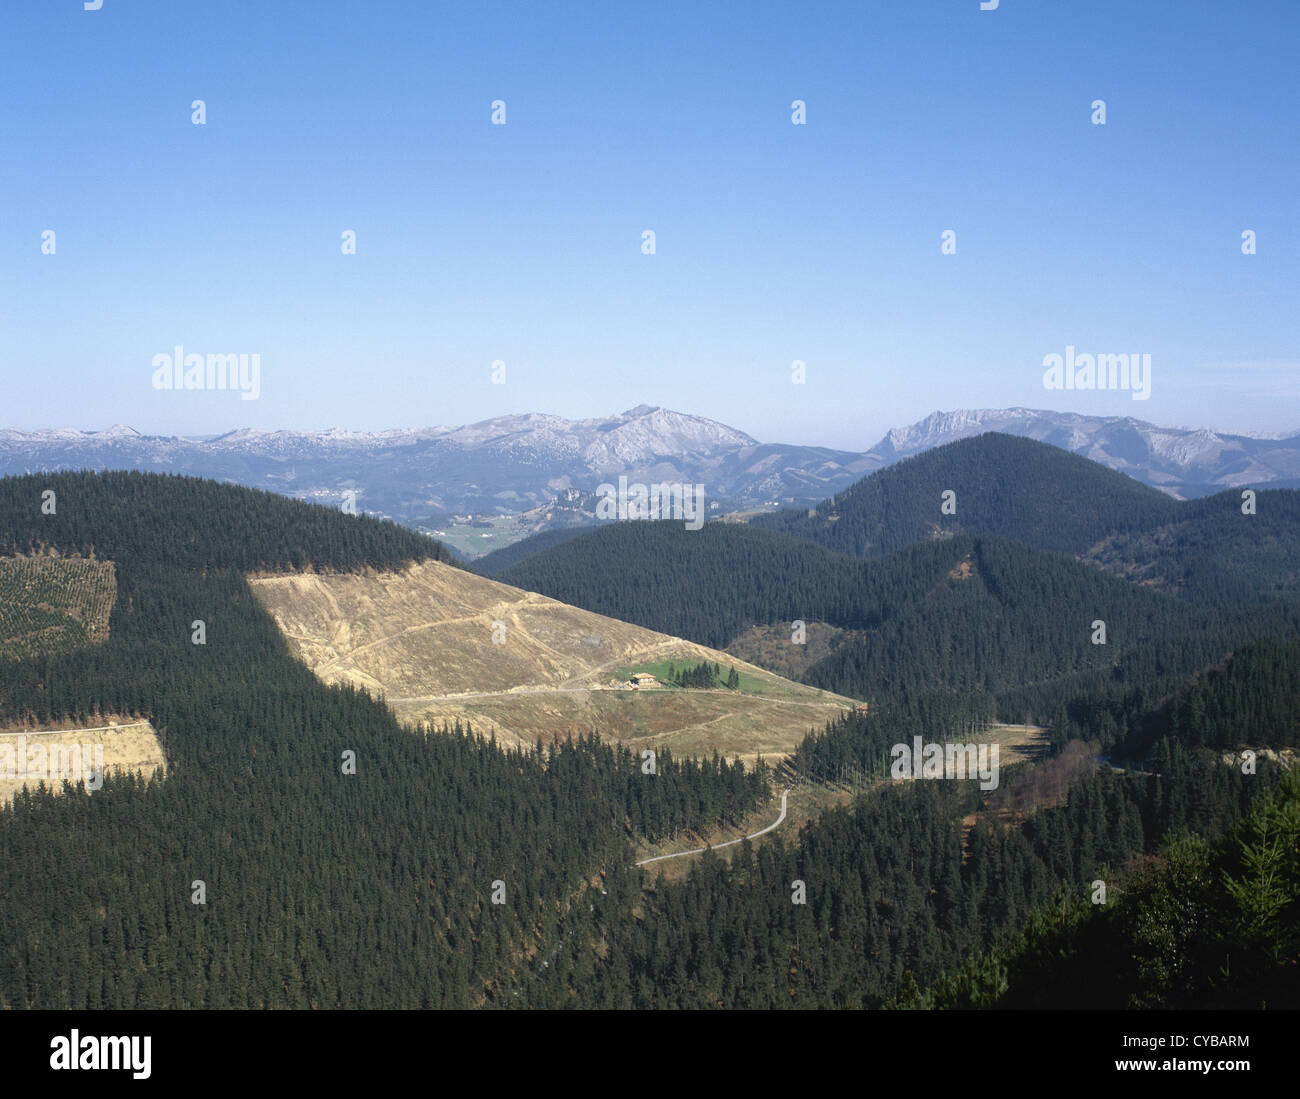 Spain. Basque country. Gorbea or Gorbeia massif. Deforestation. Felling trees. Stock Photo